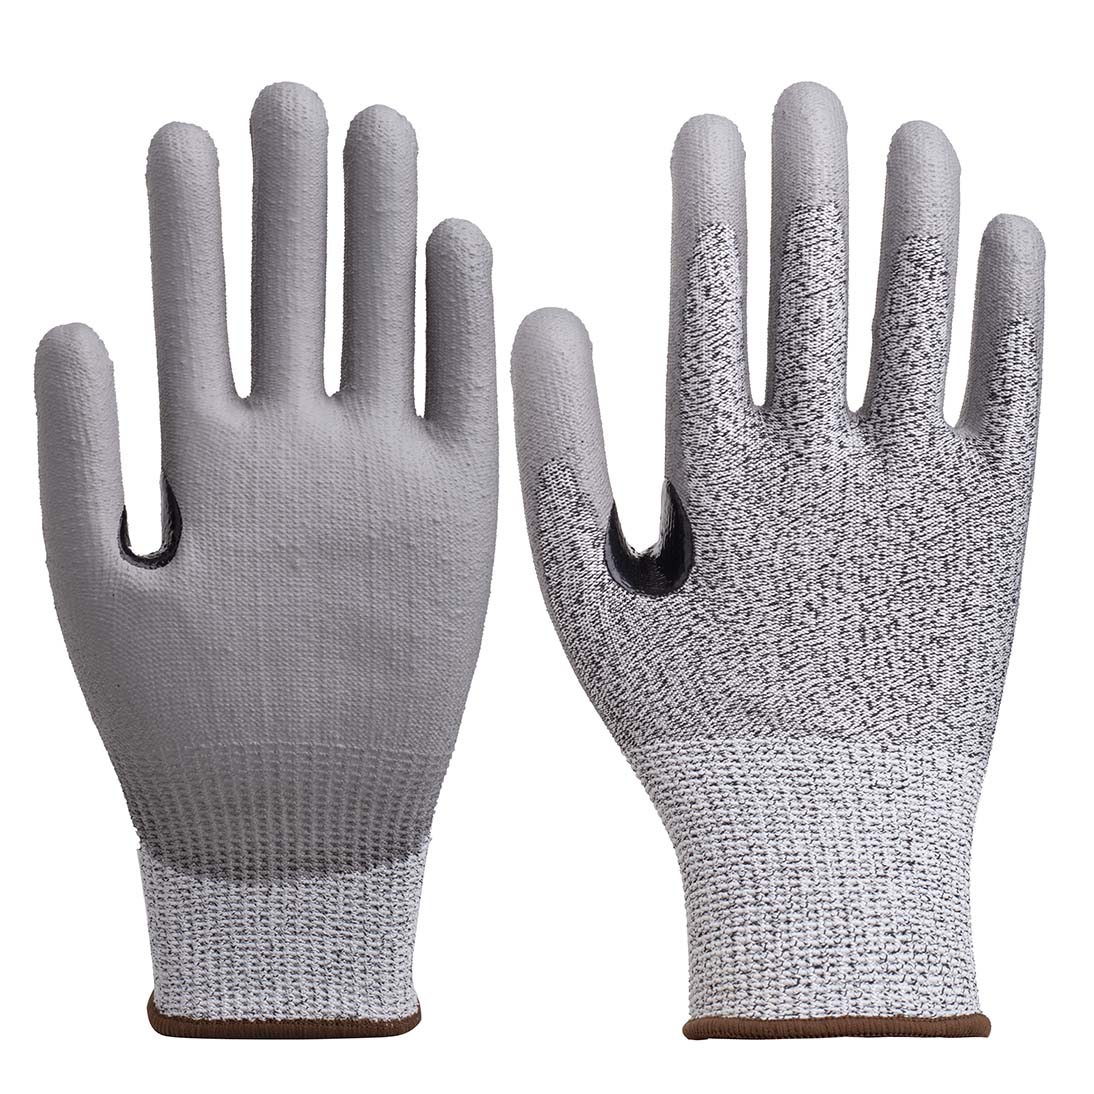 Cut proof gloves | PU palm coated gloves | coated gloves